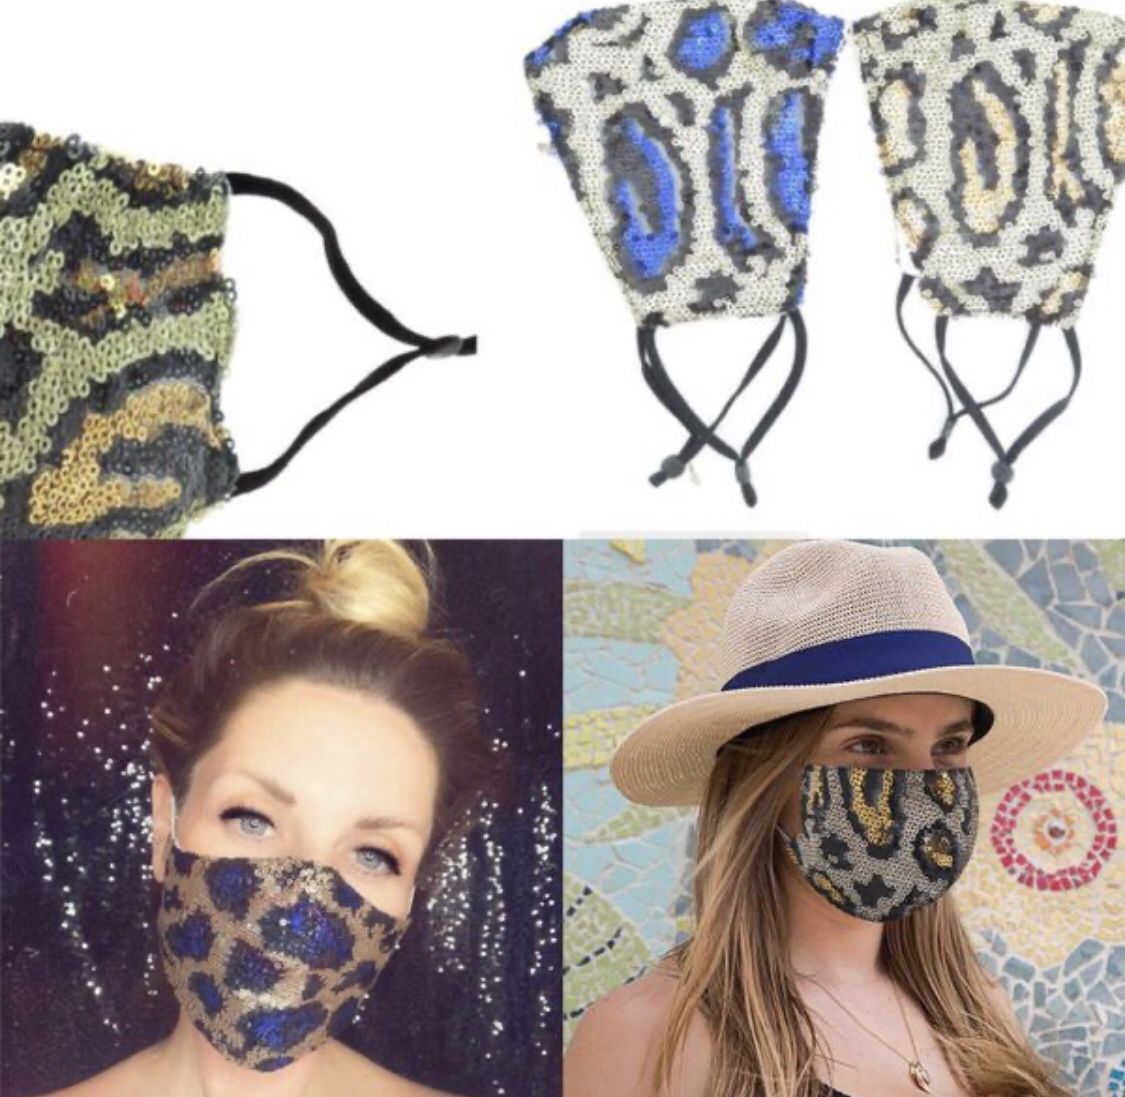 Clearance !!!! 12 pc x New style super cute leopard sequin bling rhinestone party fabric face mask